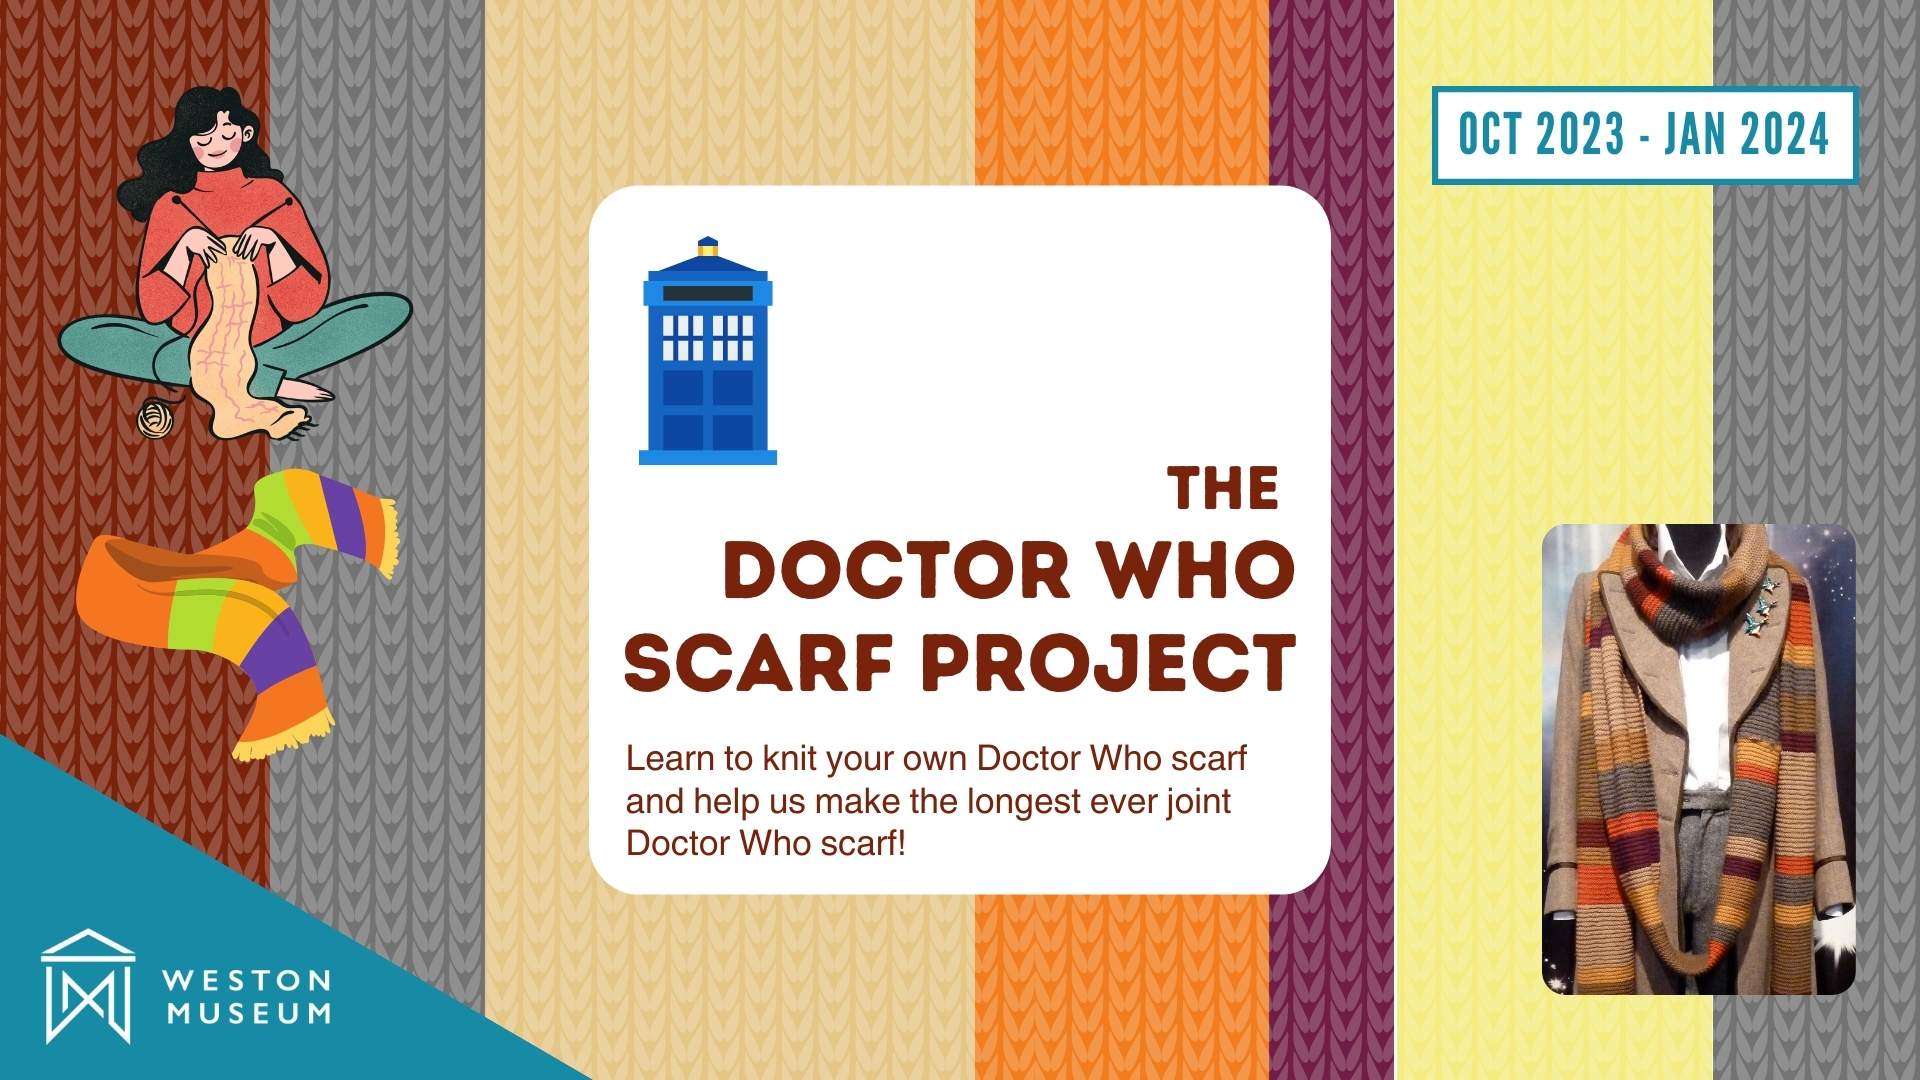 Doctor Who scarf project event image